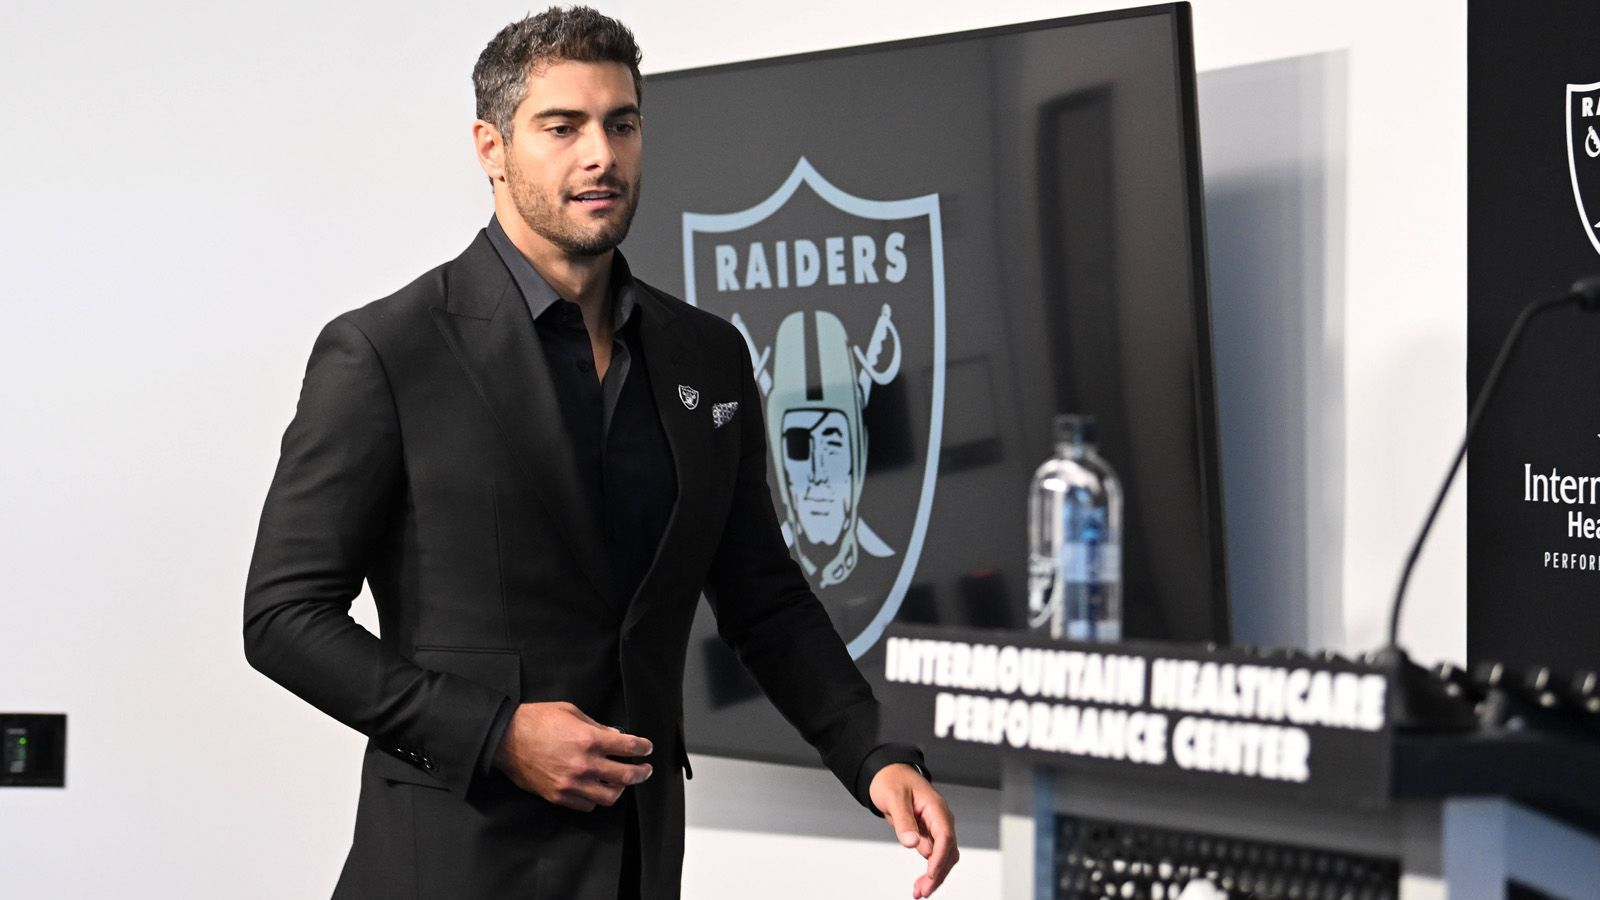 
                <strong>Jimmy Garoppolo (Las Vegas Raiders)</strong><br>
                &#x2022; <strong>Eastern Illinois University</strong>: Management (Bachelor)<br>
              